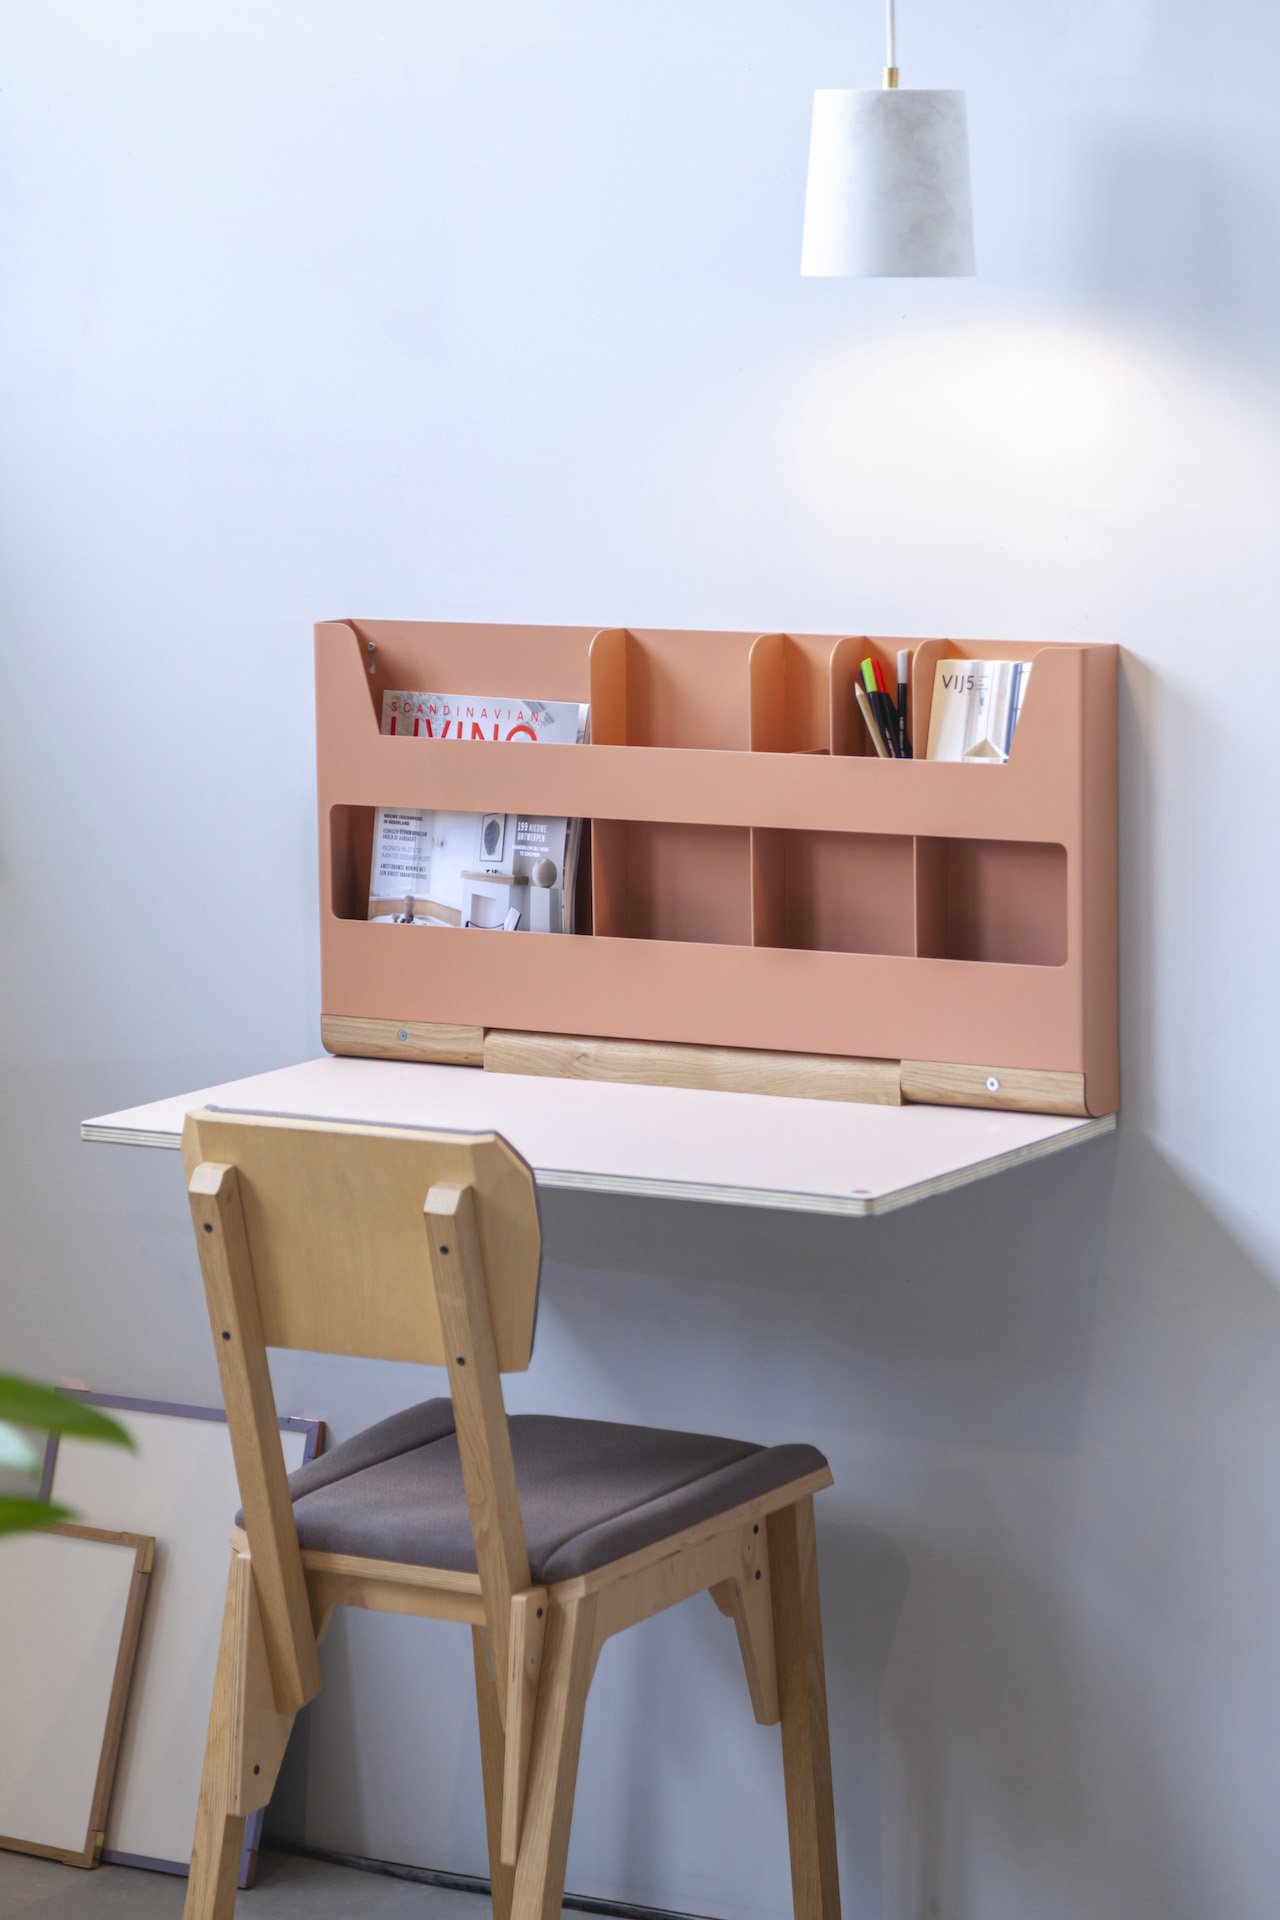 This carry along desk caddy for flexible work environment is just what I  need - Yanko Design